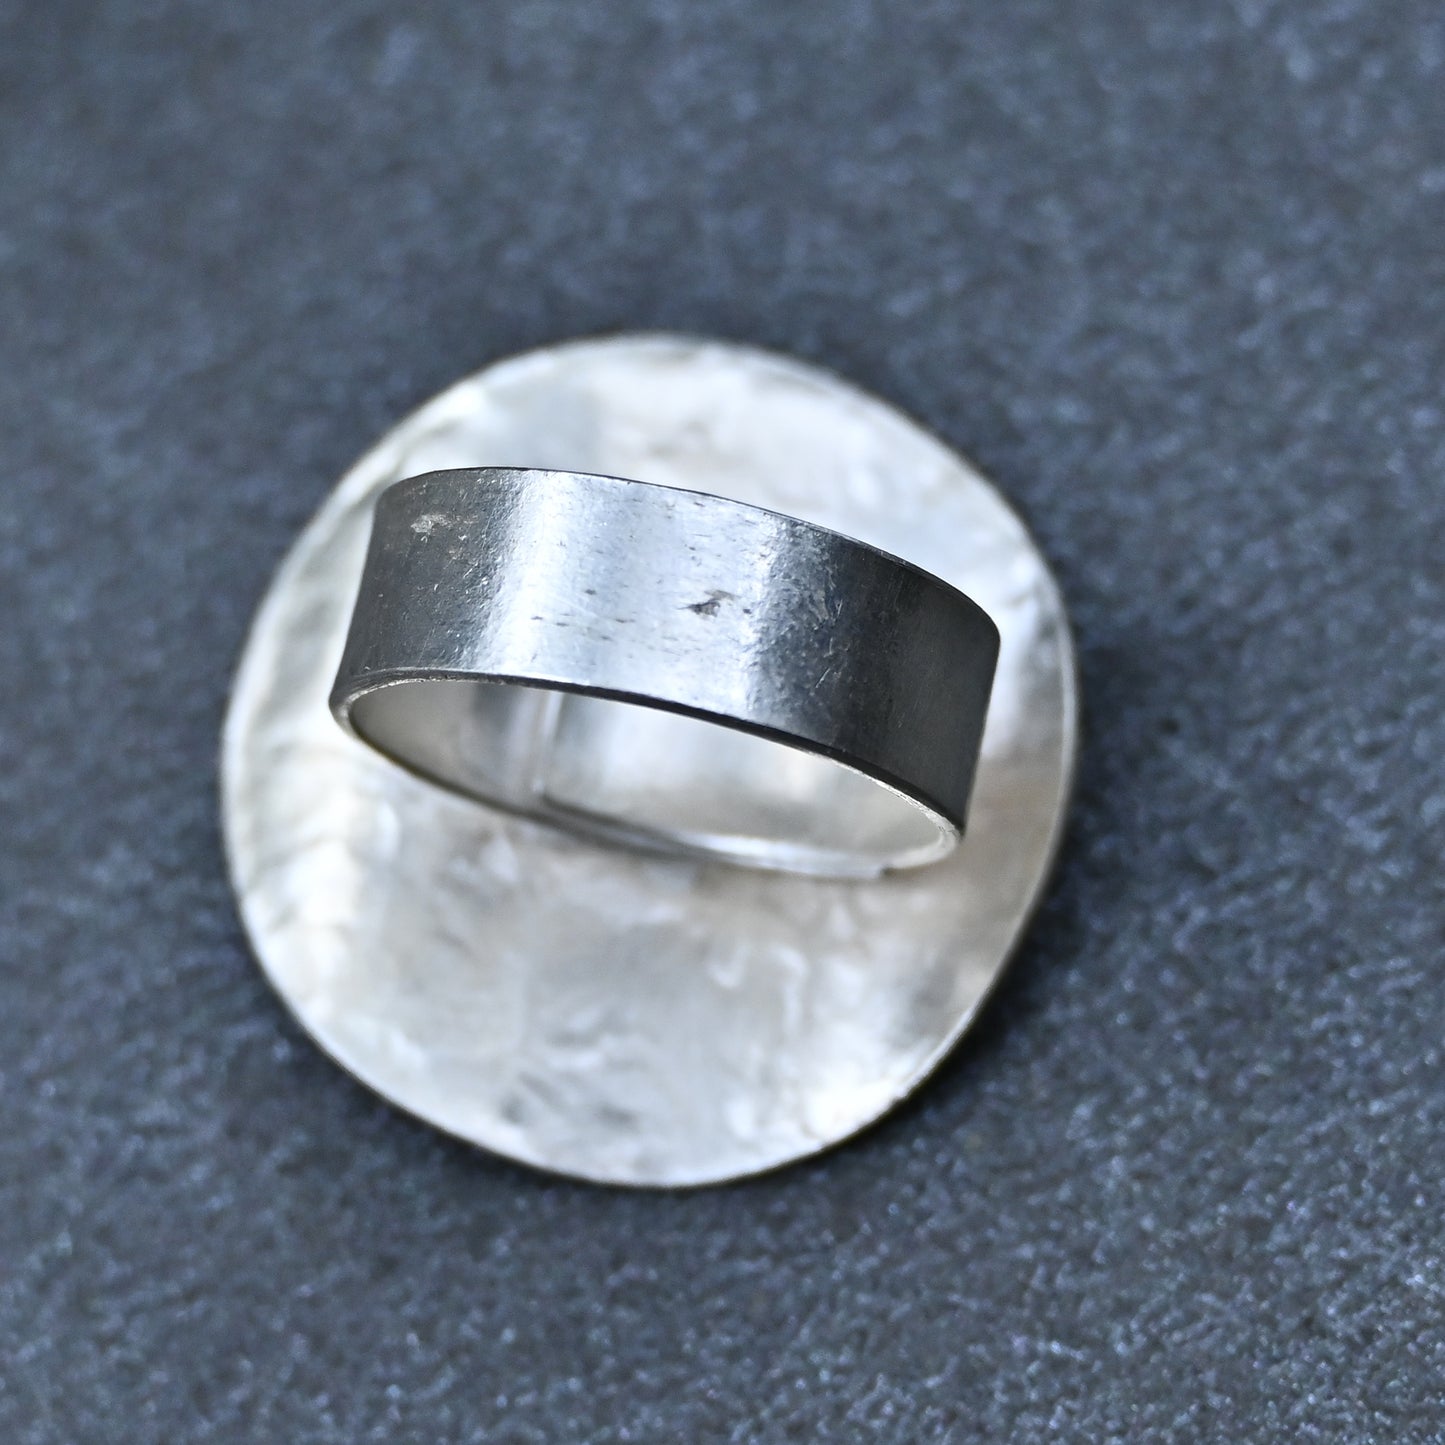 Hammered Ring! ⚒️✨